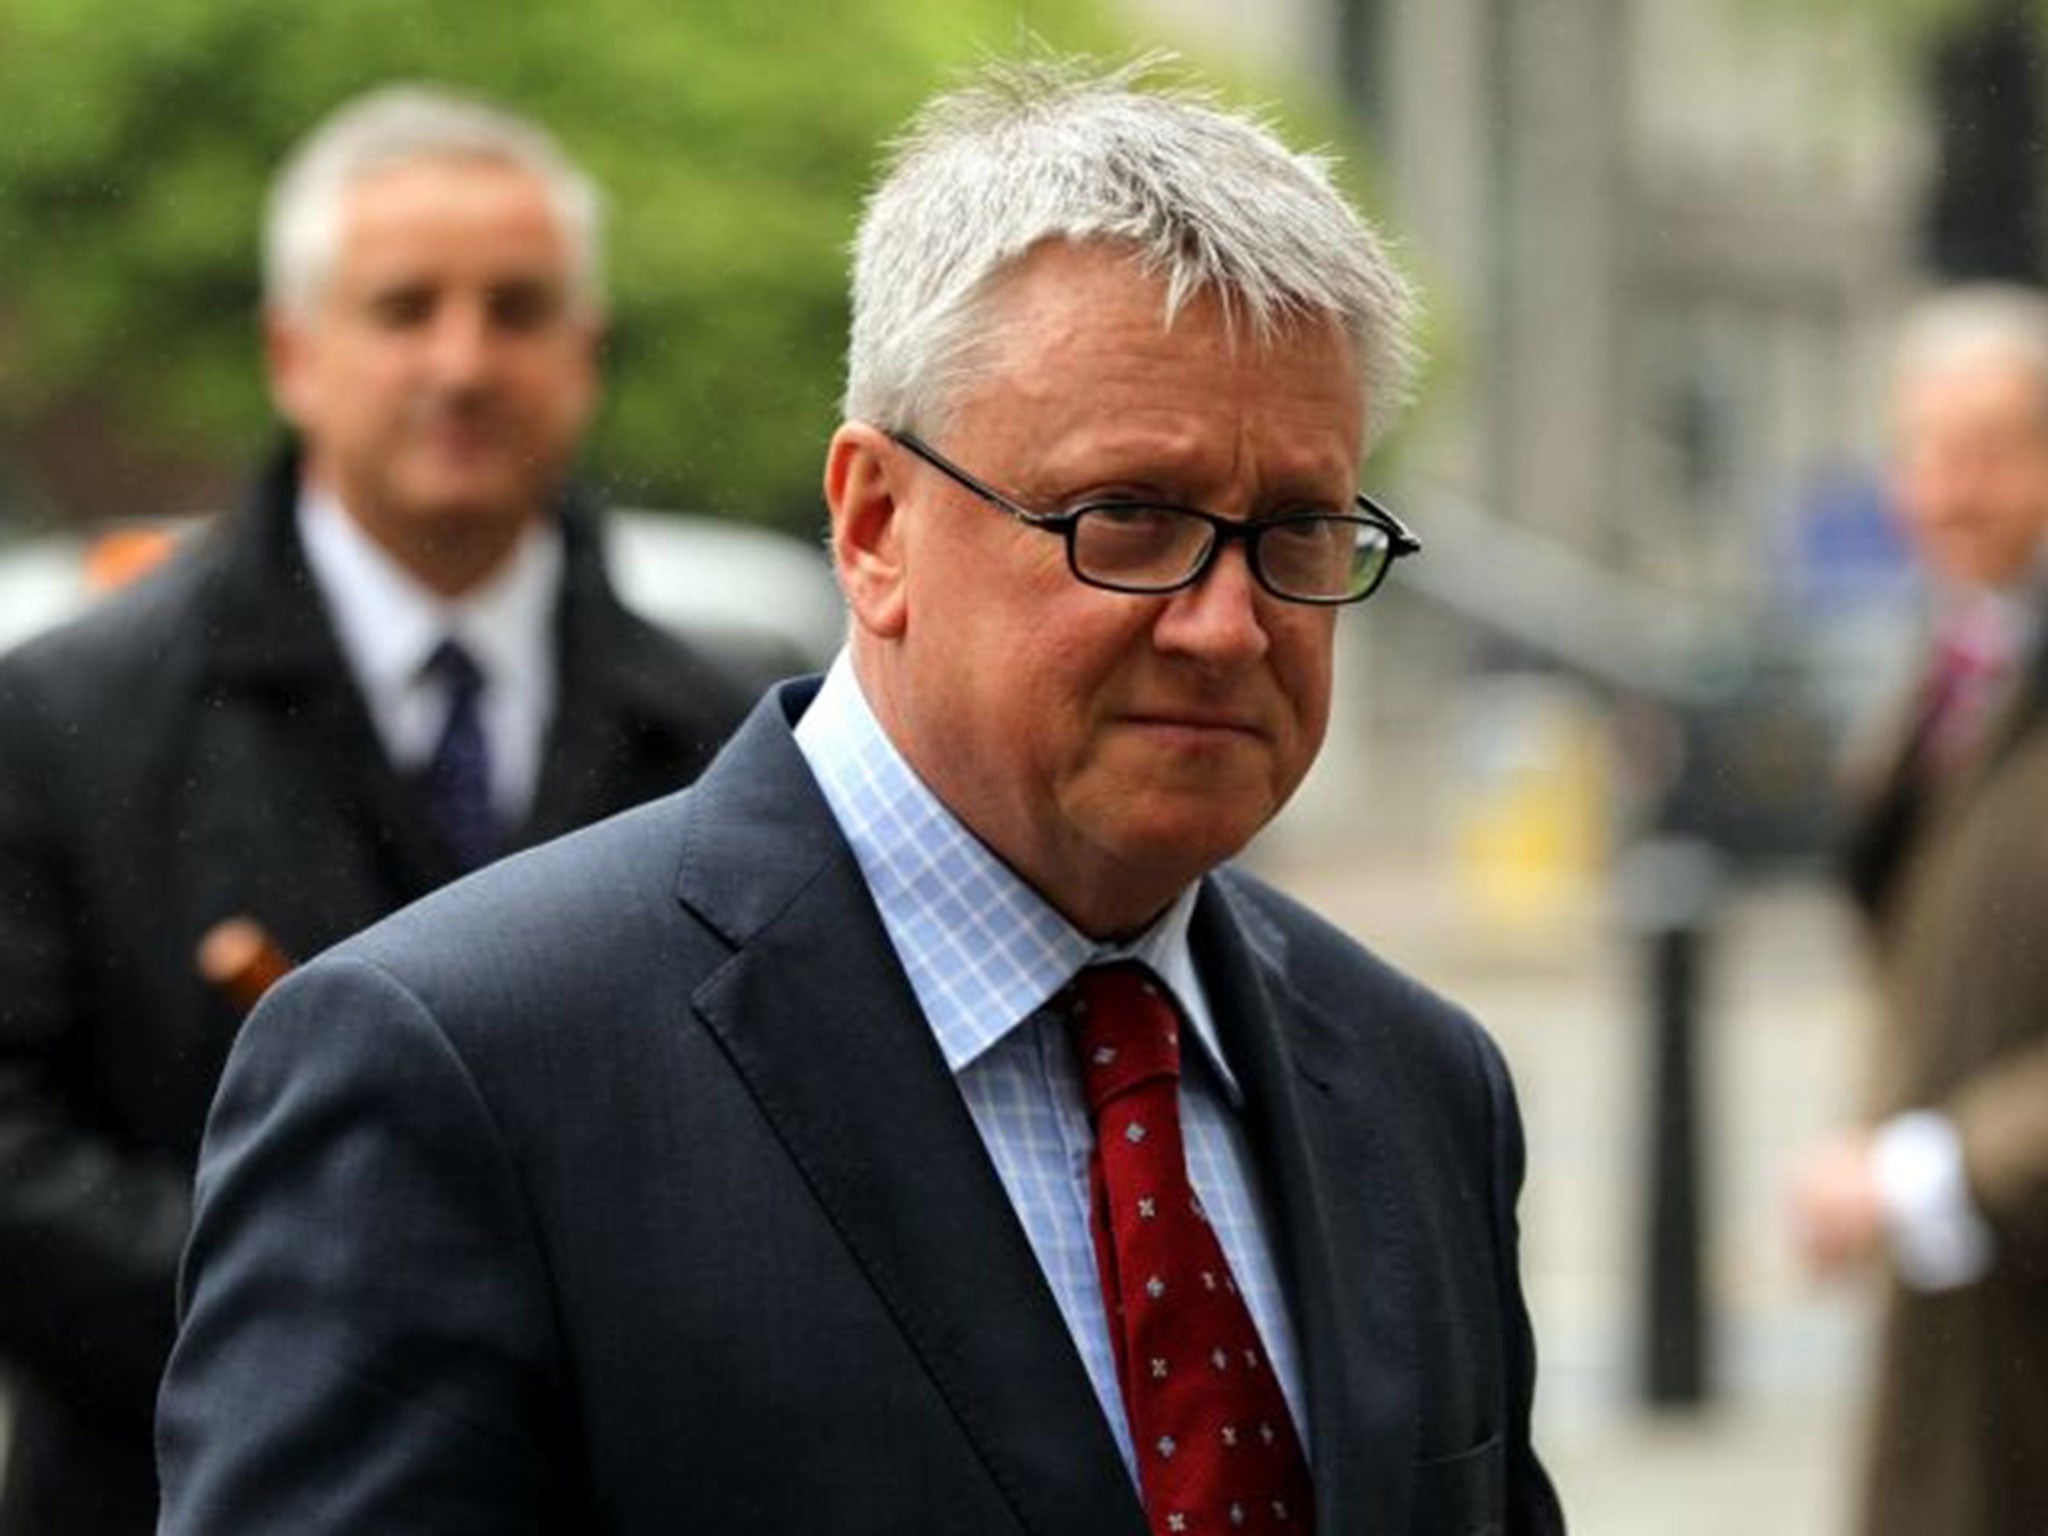 The Sun executive editor Fergus Shanahan, one of four senior Sun journalists who have been cleared of paying public officials for scoops, including titbits on the Duke of Cambridge and Prince Harry.